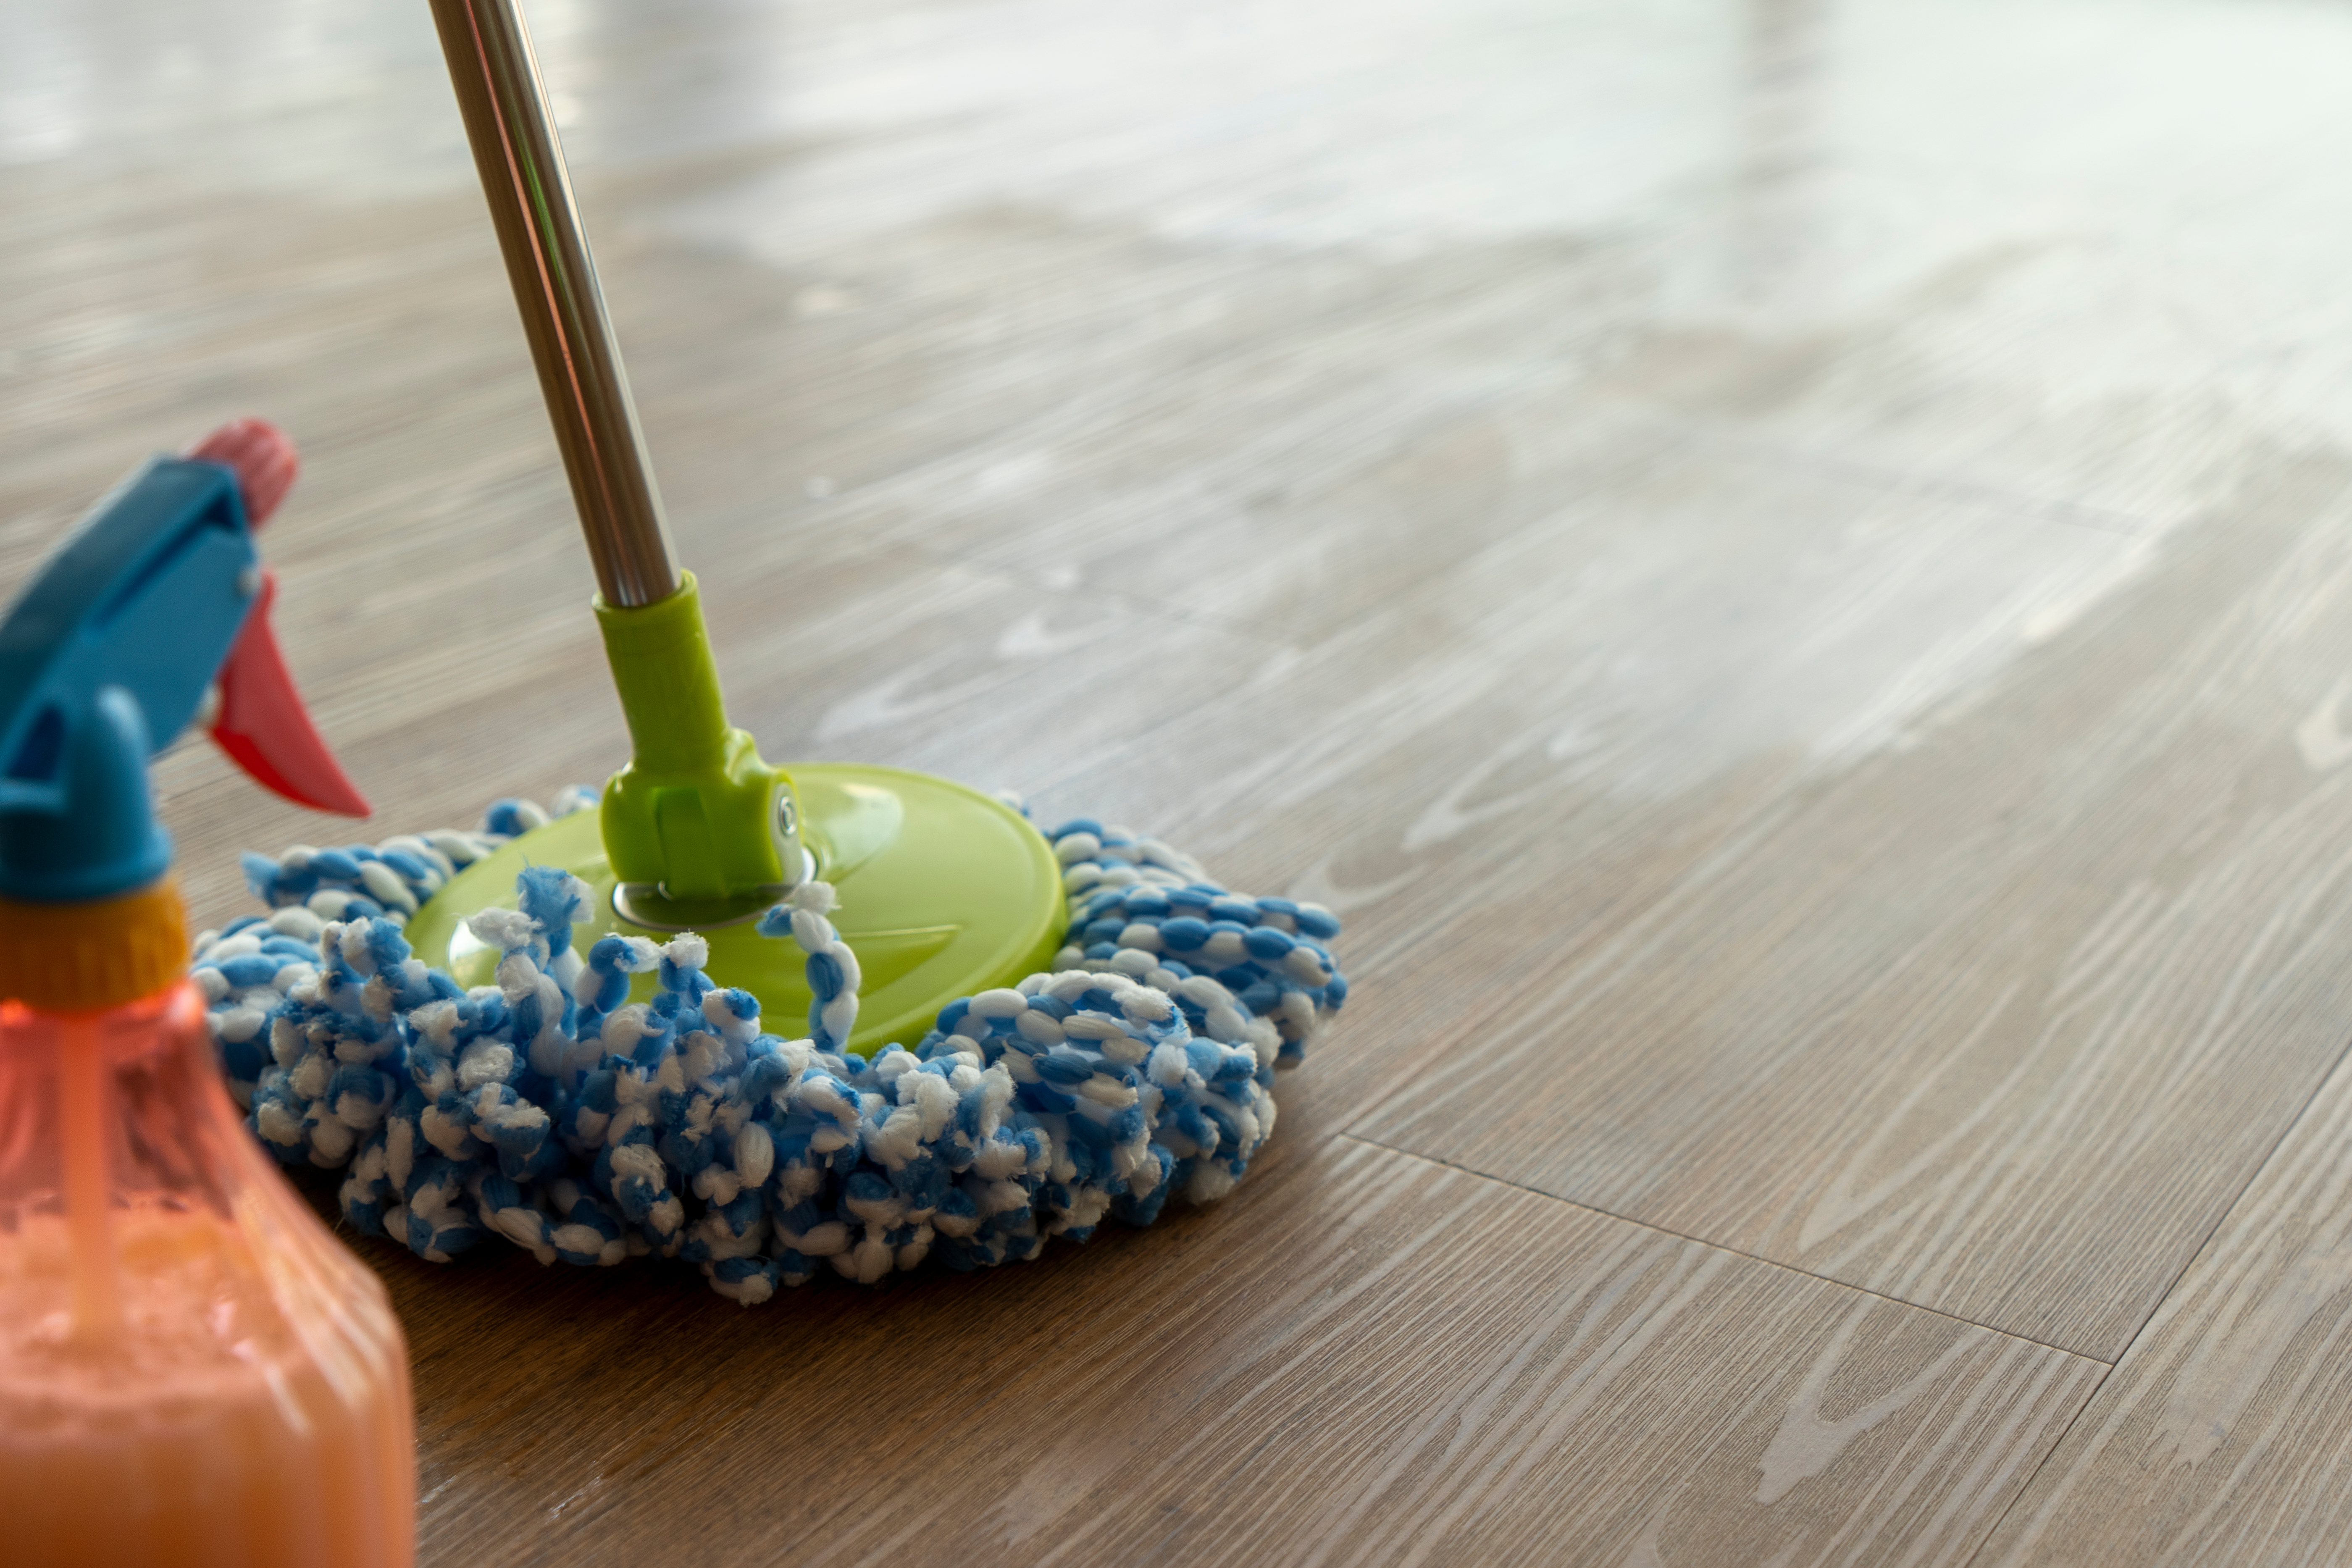 Leave your floor to dry after mopping with clean water | Source: Shutterstock